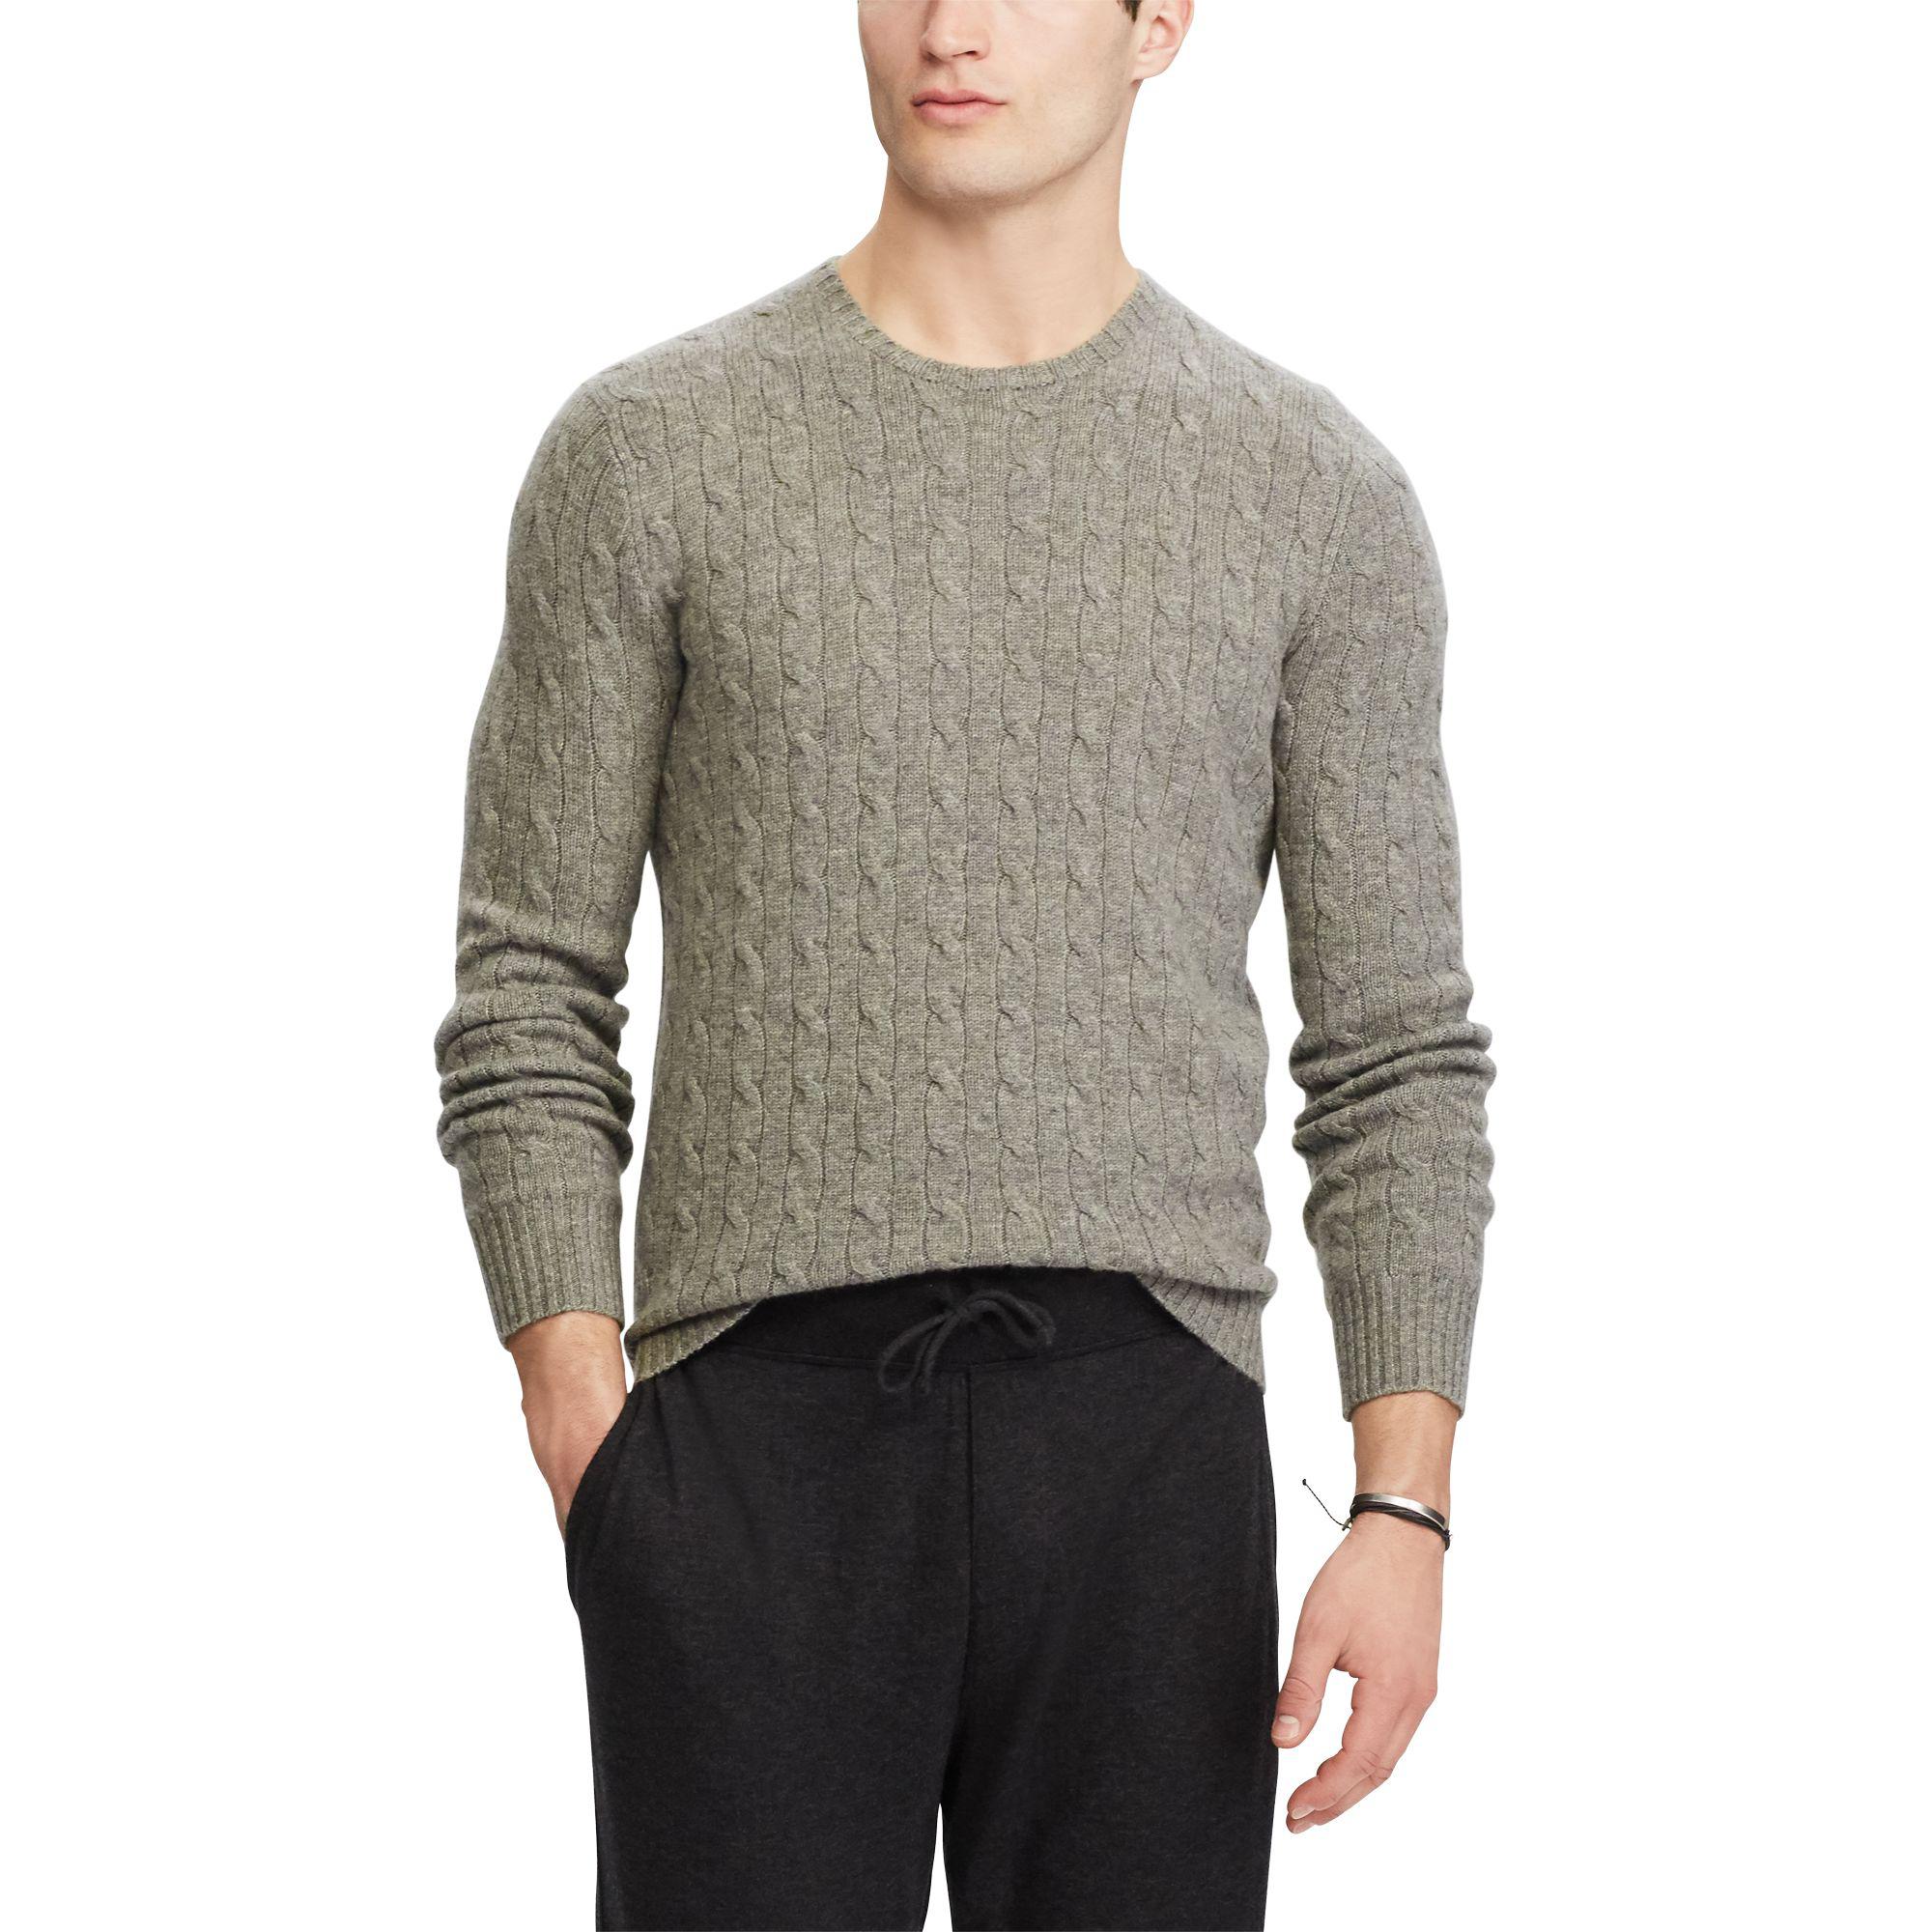 Polo Ralph Lauren Denim Cable-knit Cashmere Jumper in Gray for Men - Lyst